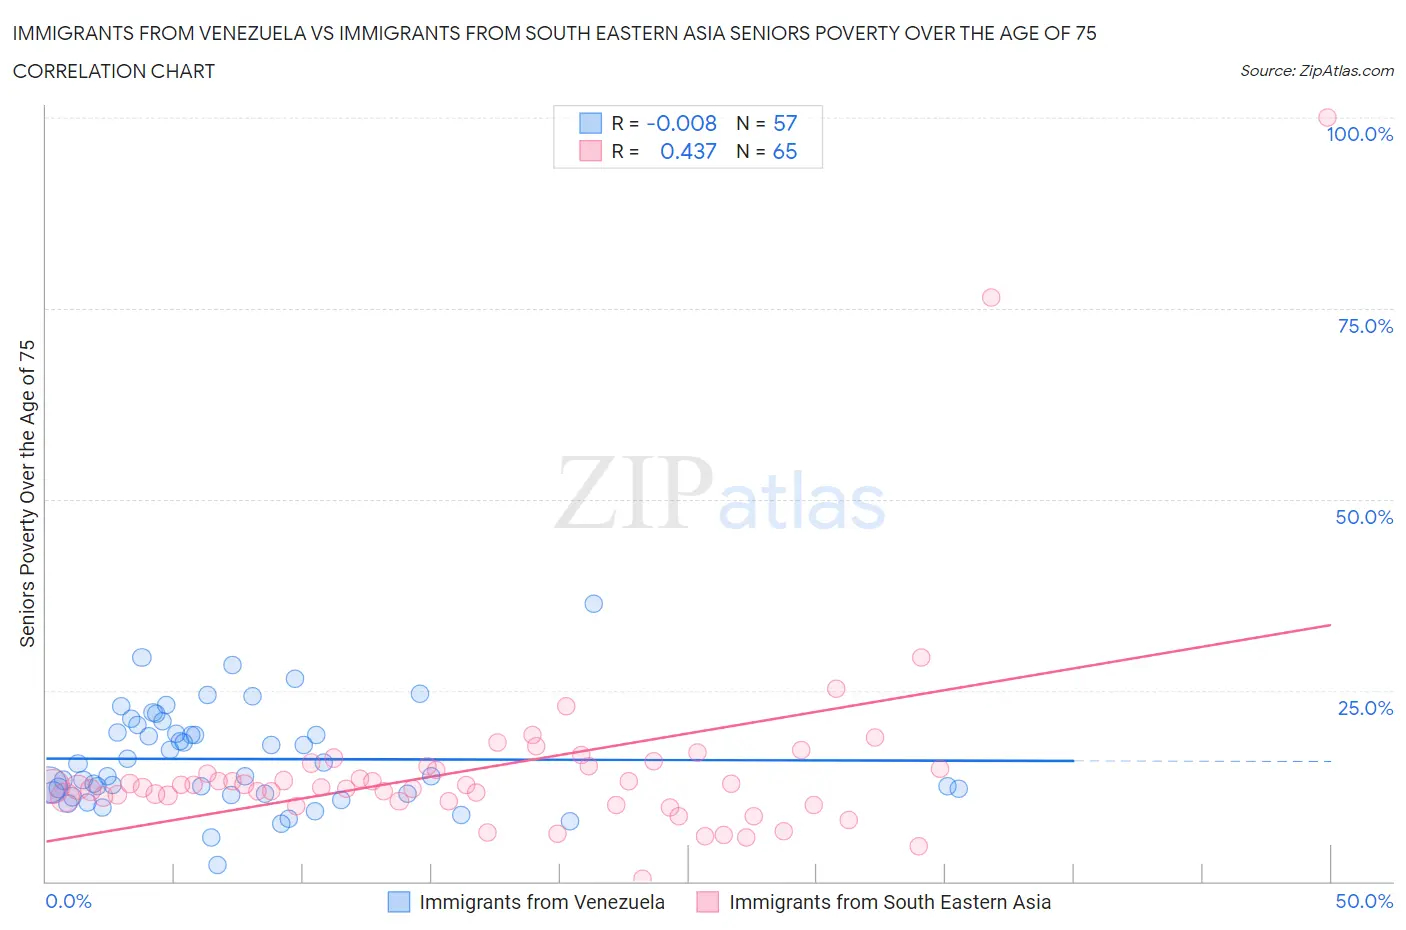 Immigrants from Venezuela vs Immigrants from South Eastern Asia Seniors Poverty Over the Age of 75